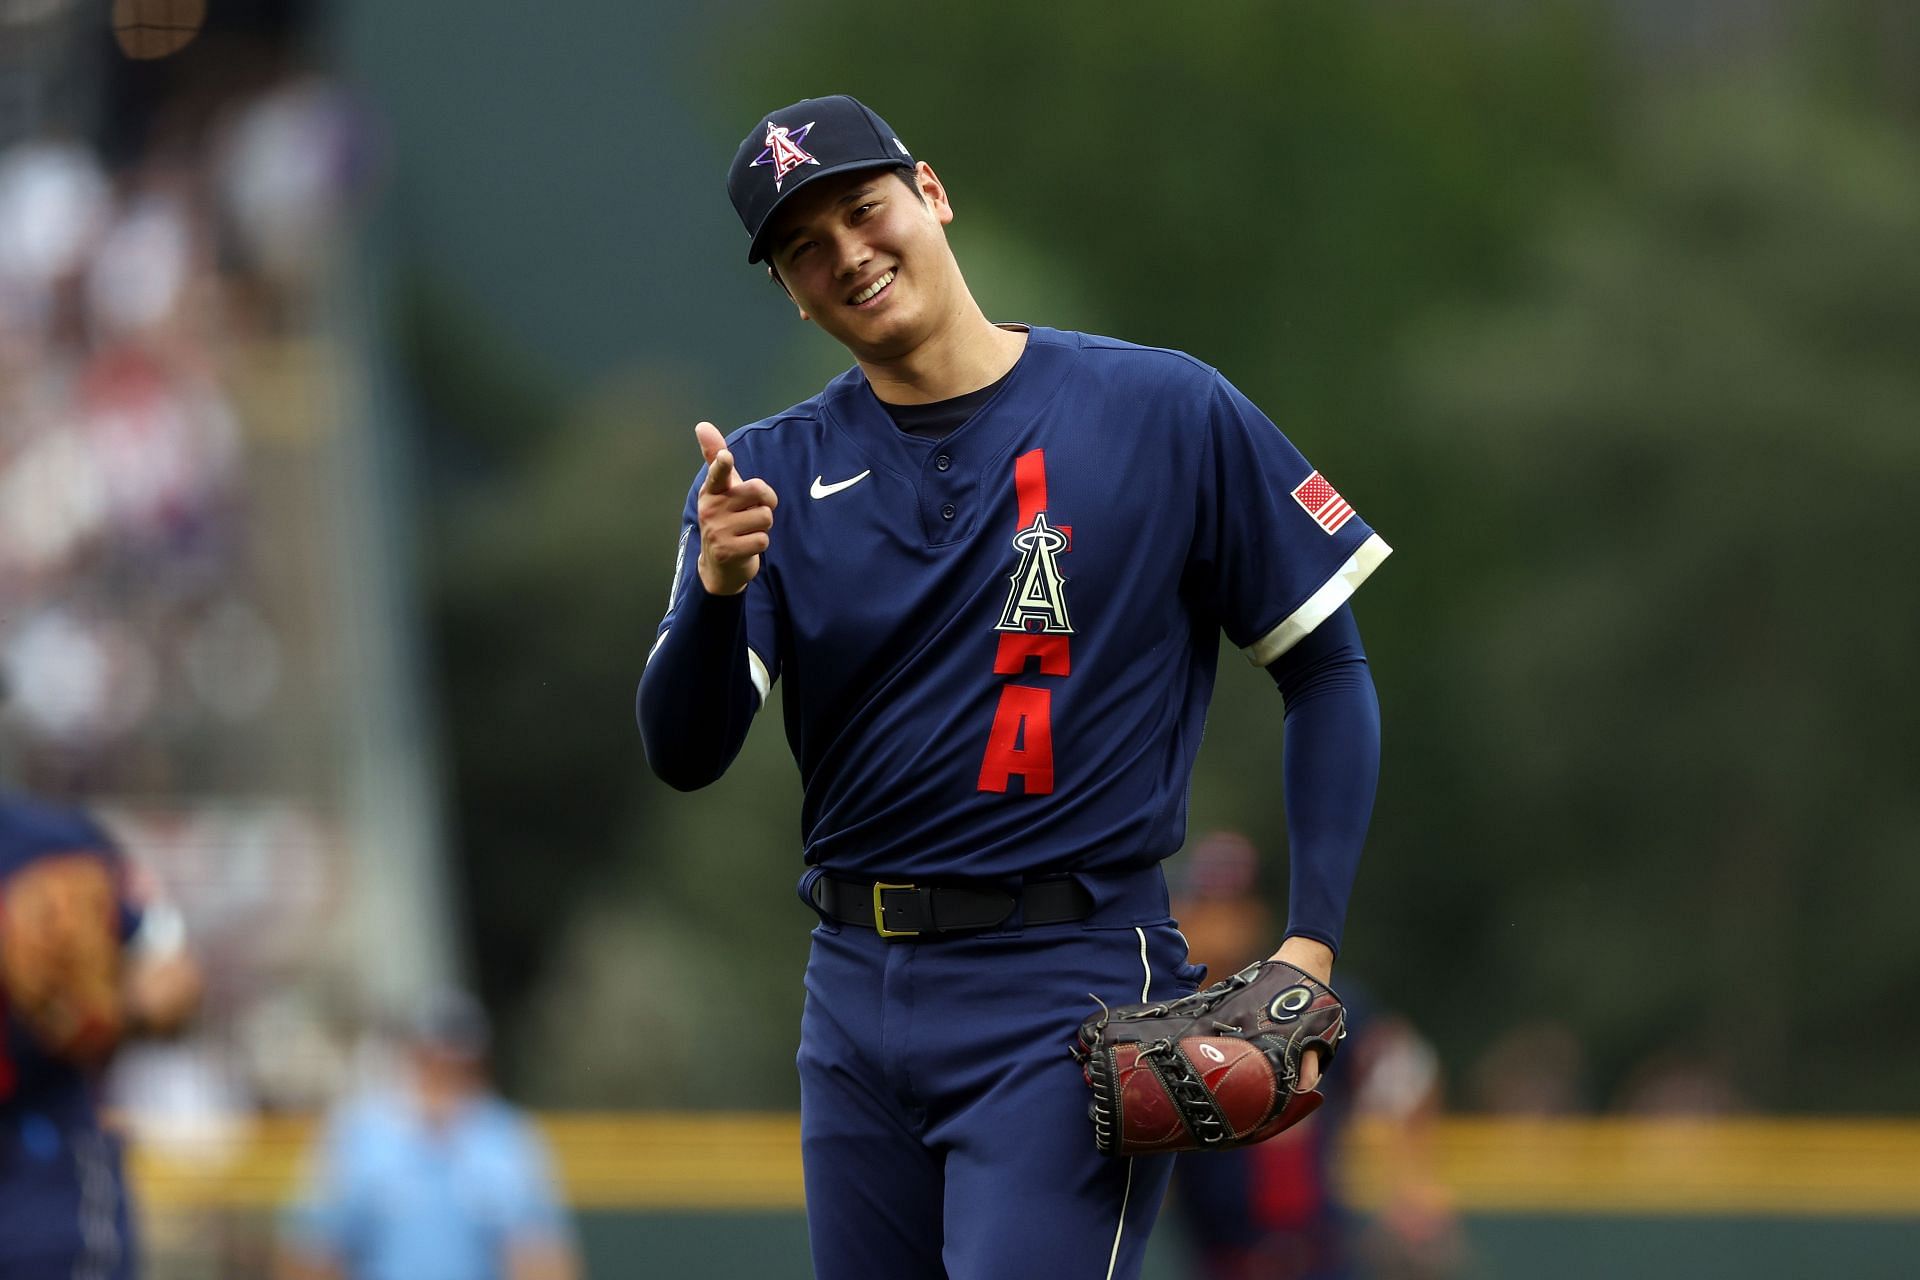 Shohei Ohtani poses for a picture.